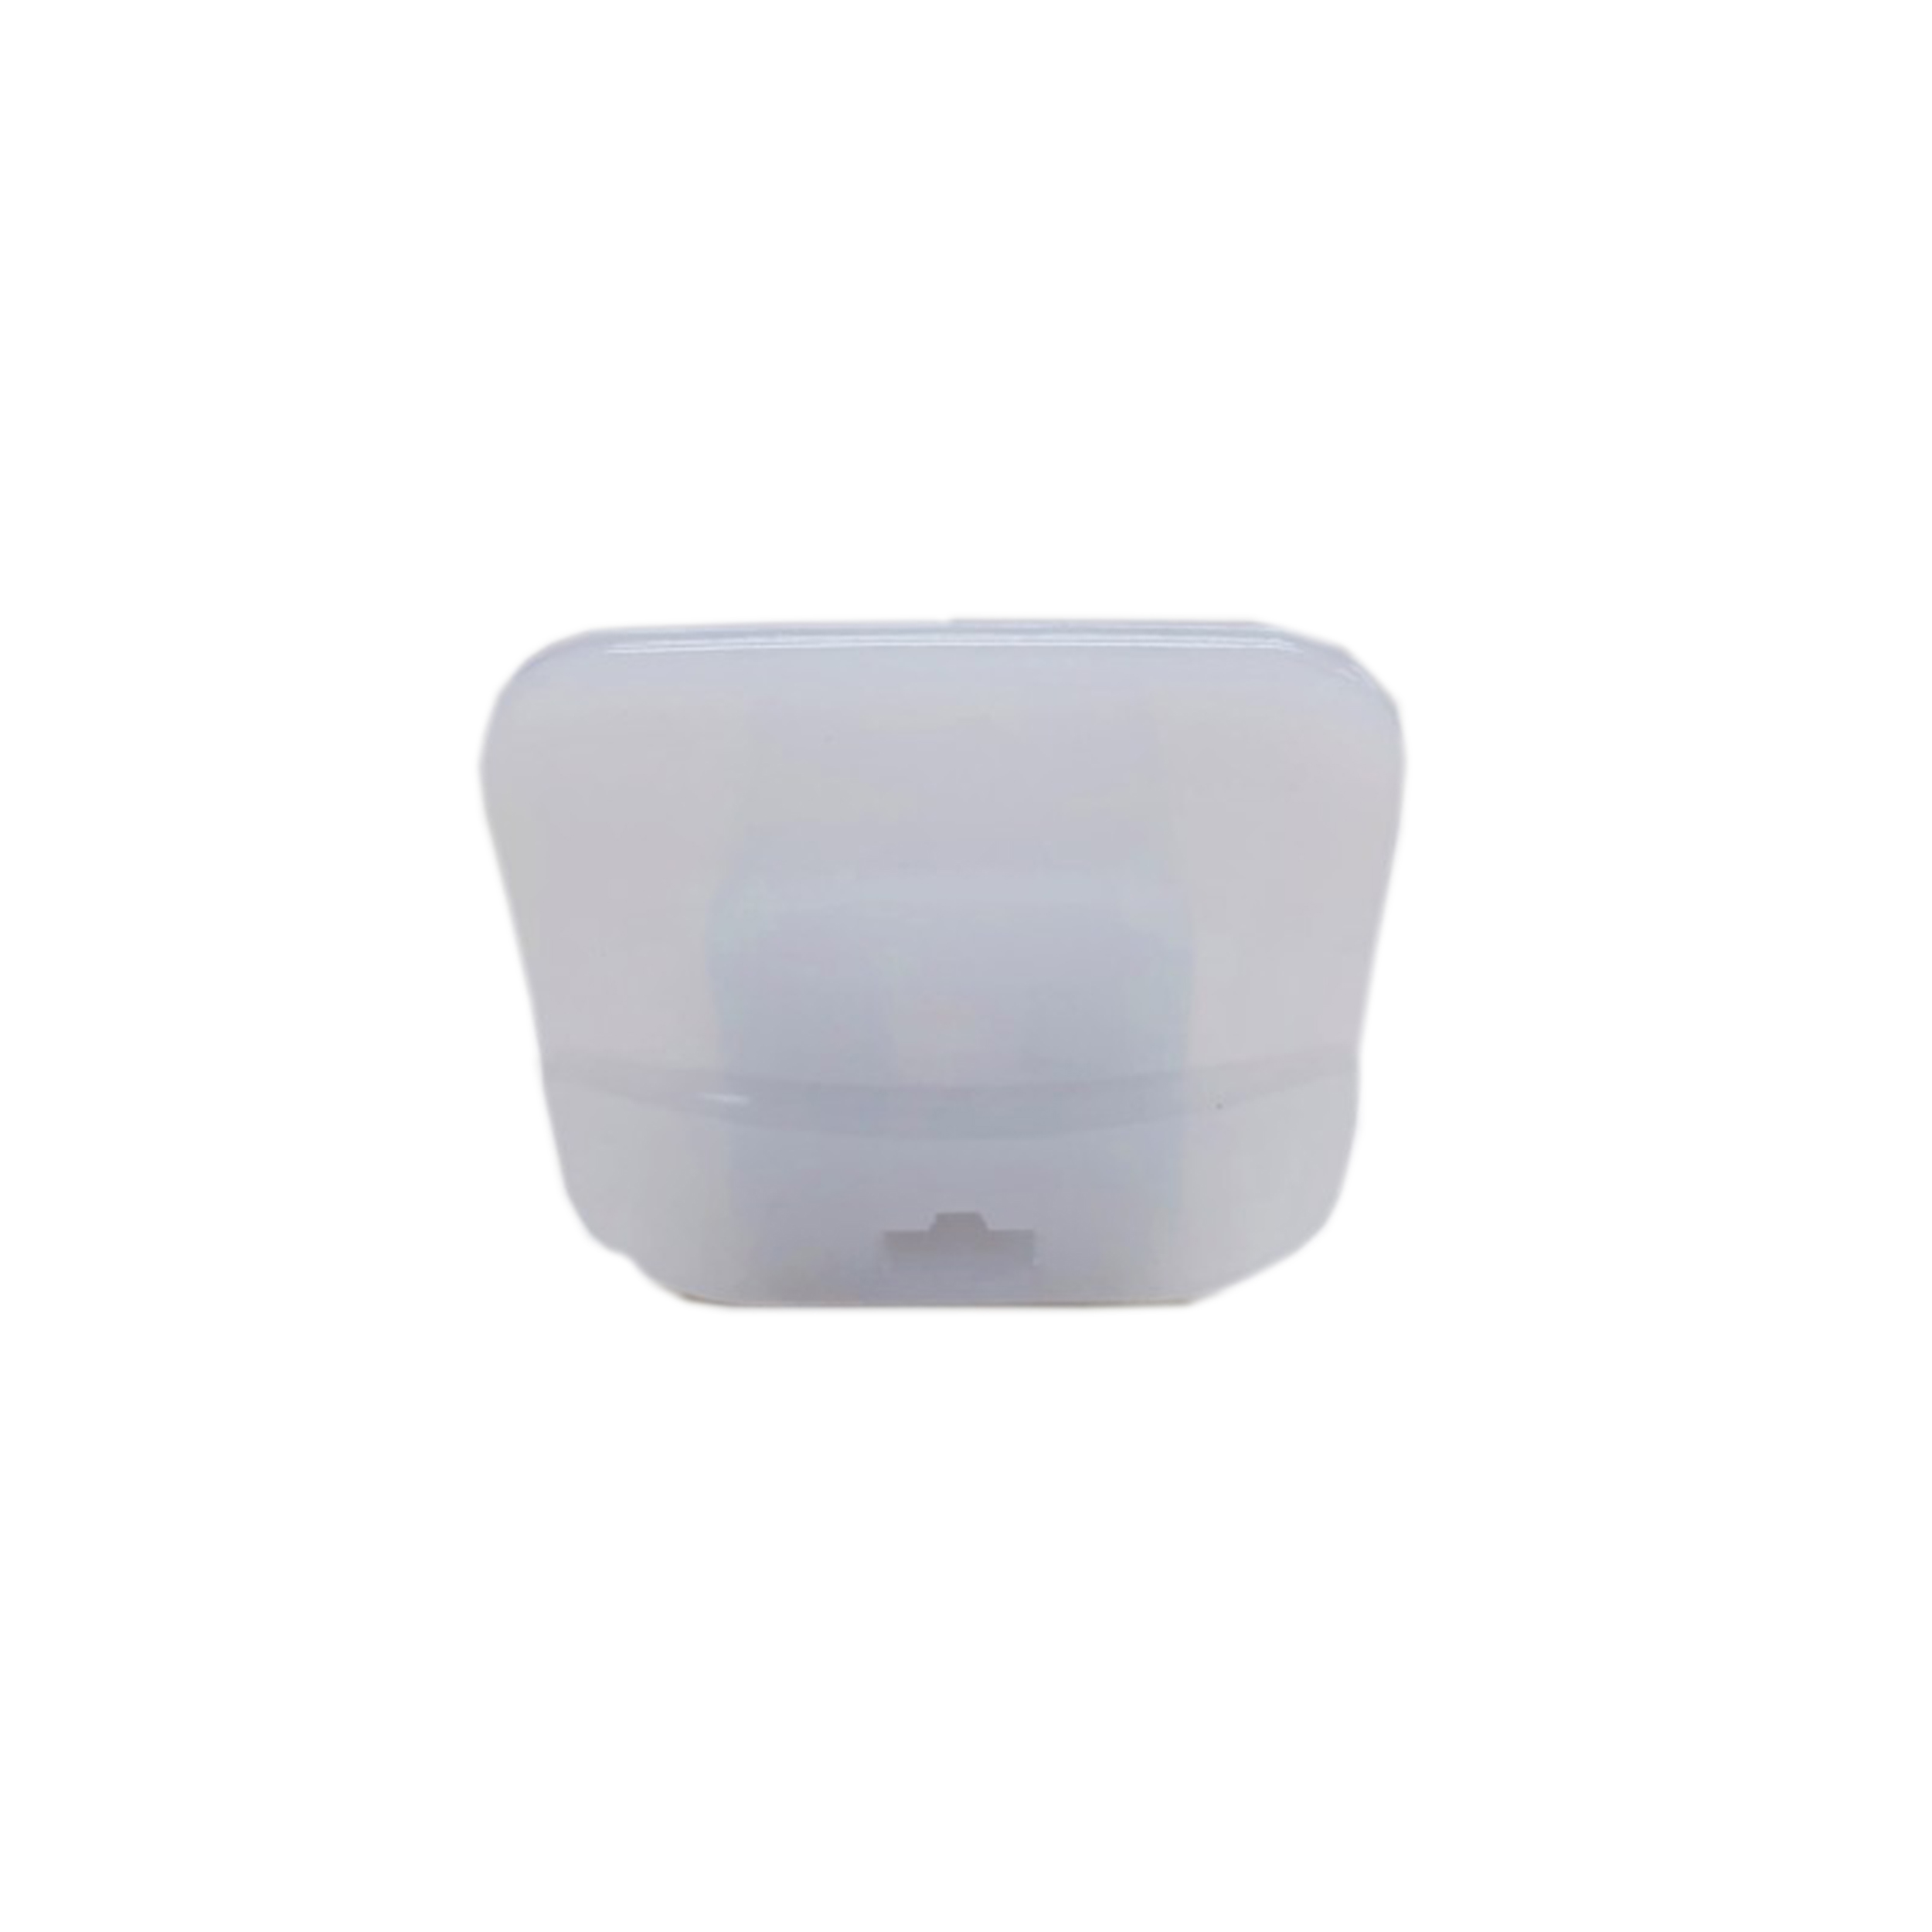 Standard Chinrest (M0400419_Cover-Acessories Normal Chinrest -A/PC-Clear Gray/M0028885)